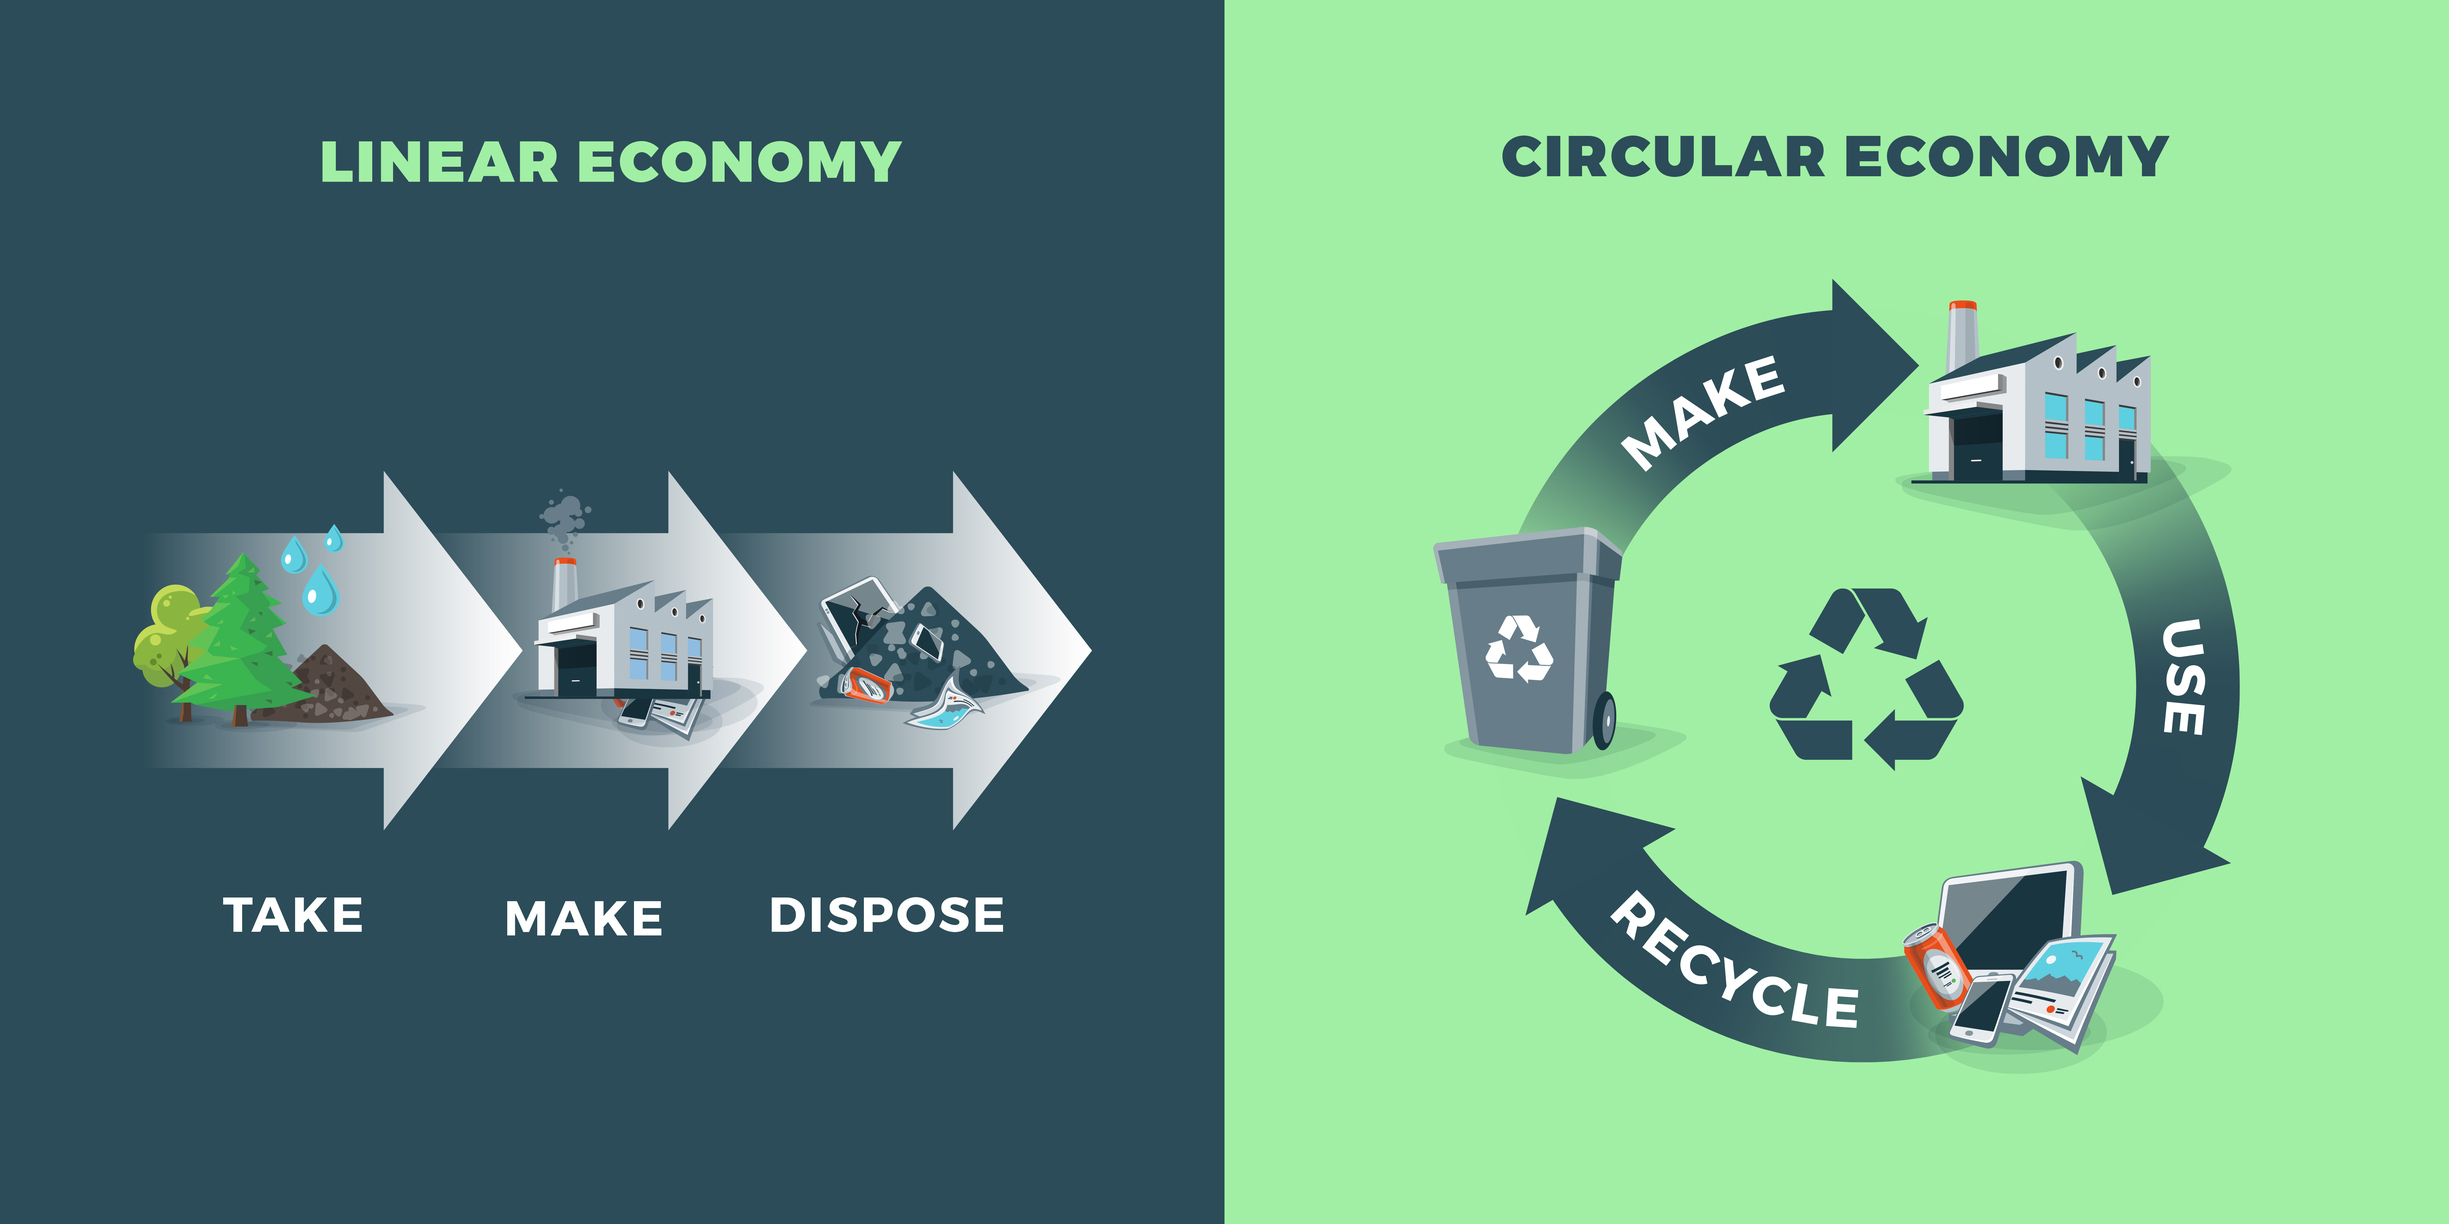 Comparing circular and linear economy showing product life cycle. Natural resources are taken to manufacturing. After usage product is recycled or dumped. Waste recycling management concept.